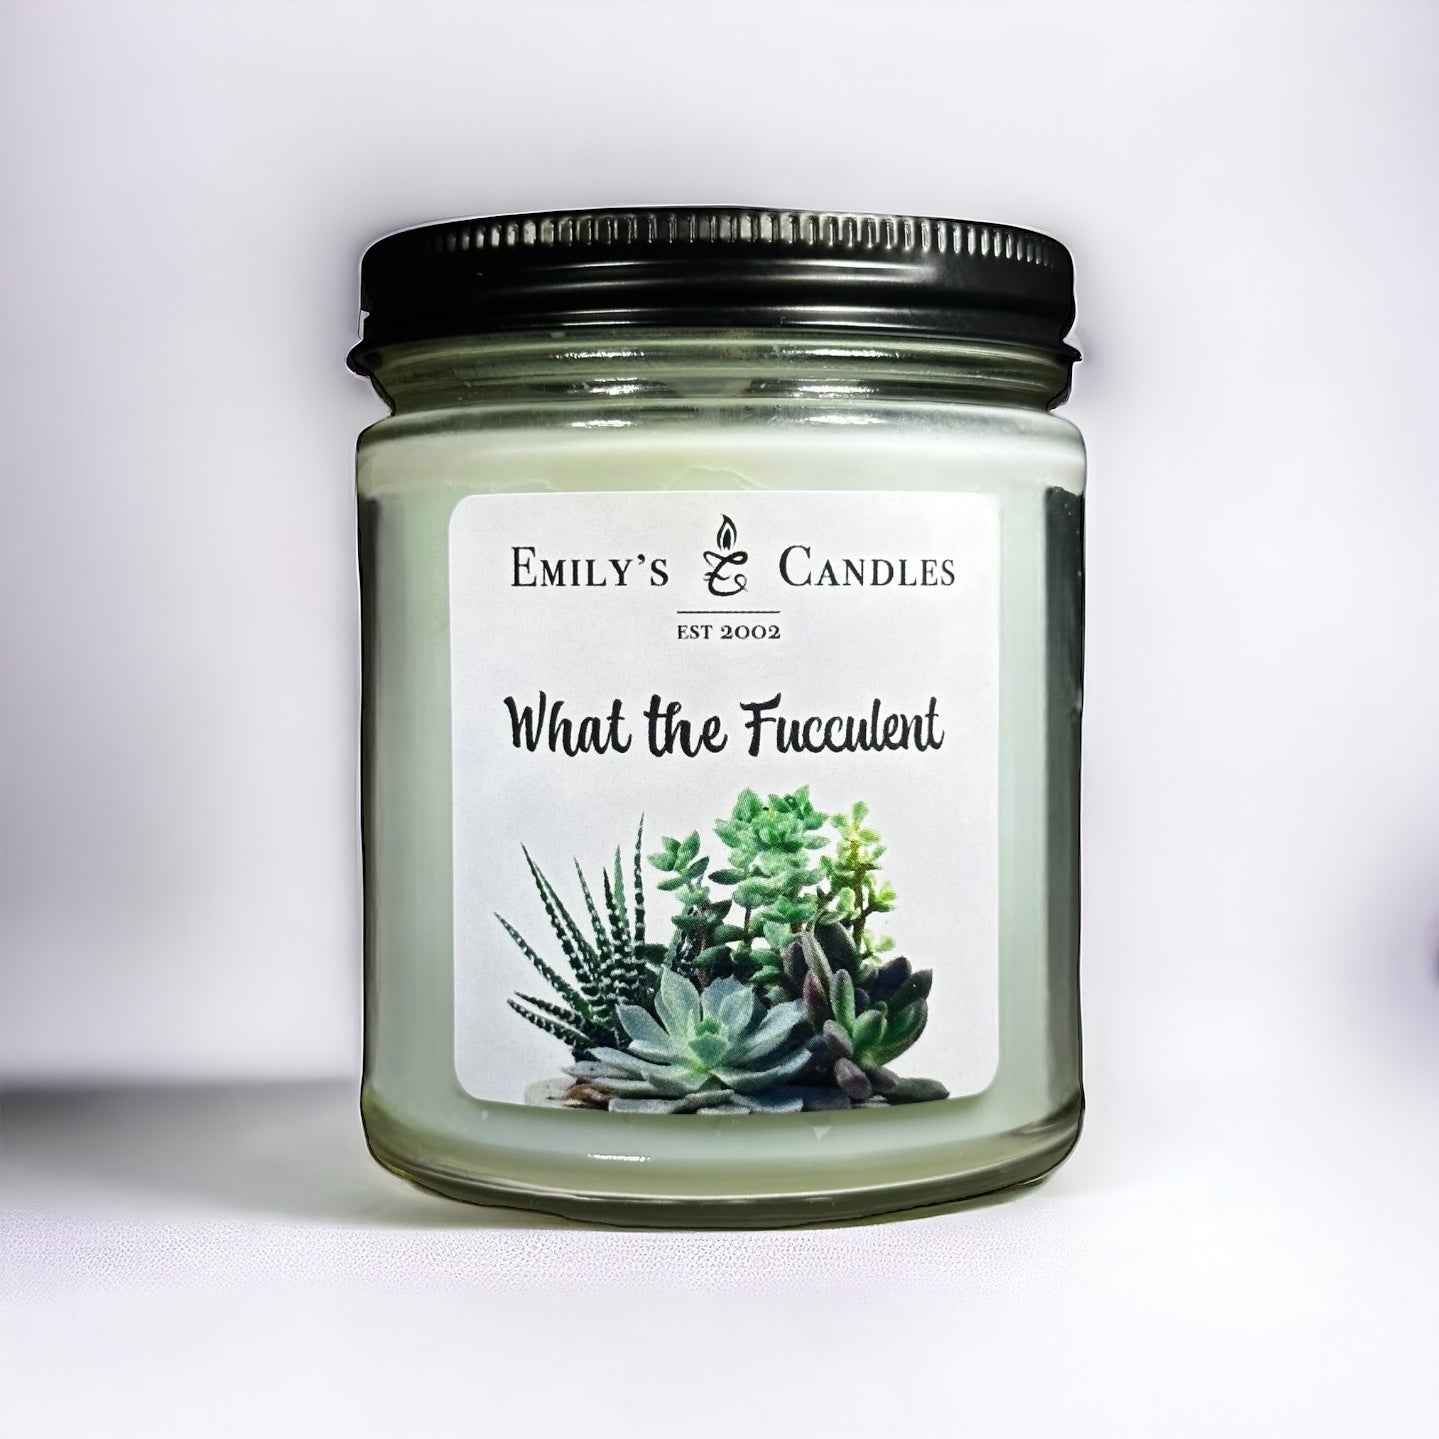 9 Oz Soy Candle “What the Fucculent” in Aloe & Green Clover scent